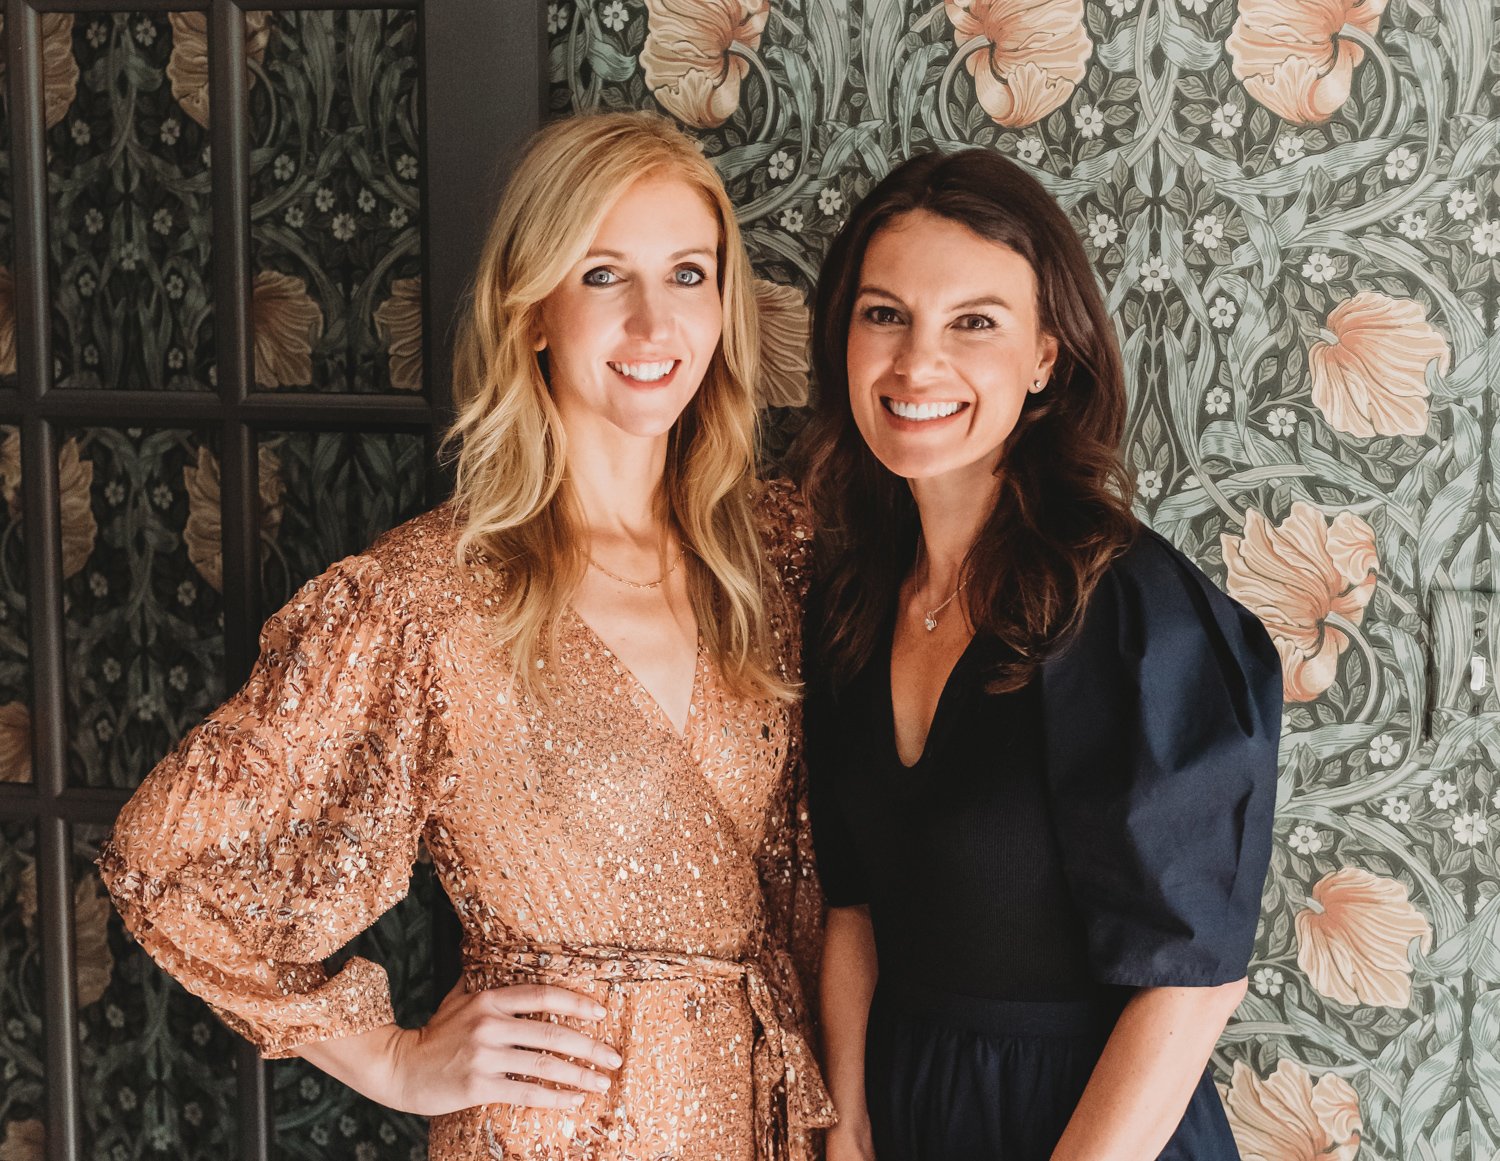 Designers Renee DiSanto and Christina Samatas posing against a floral patterned wallpaper